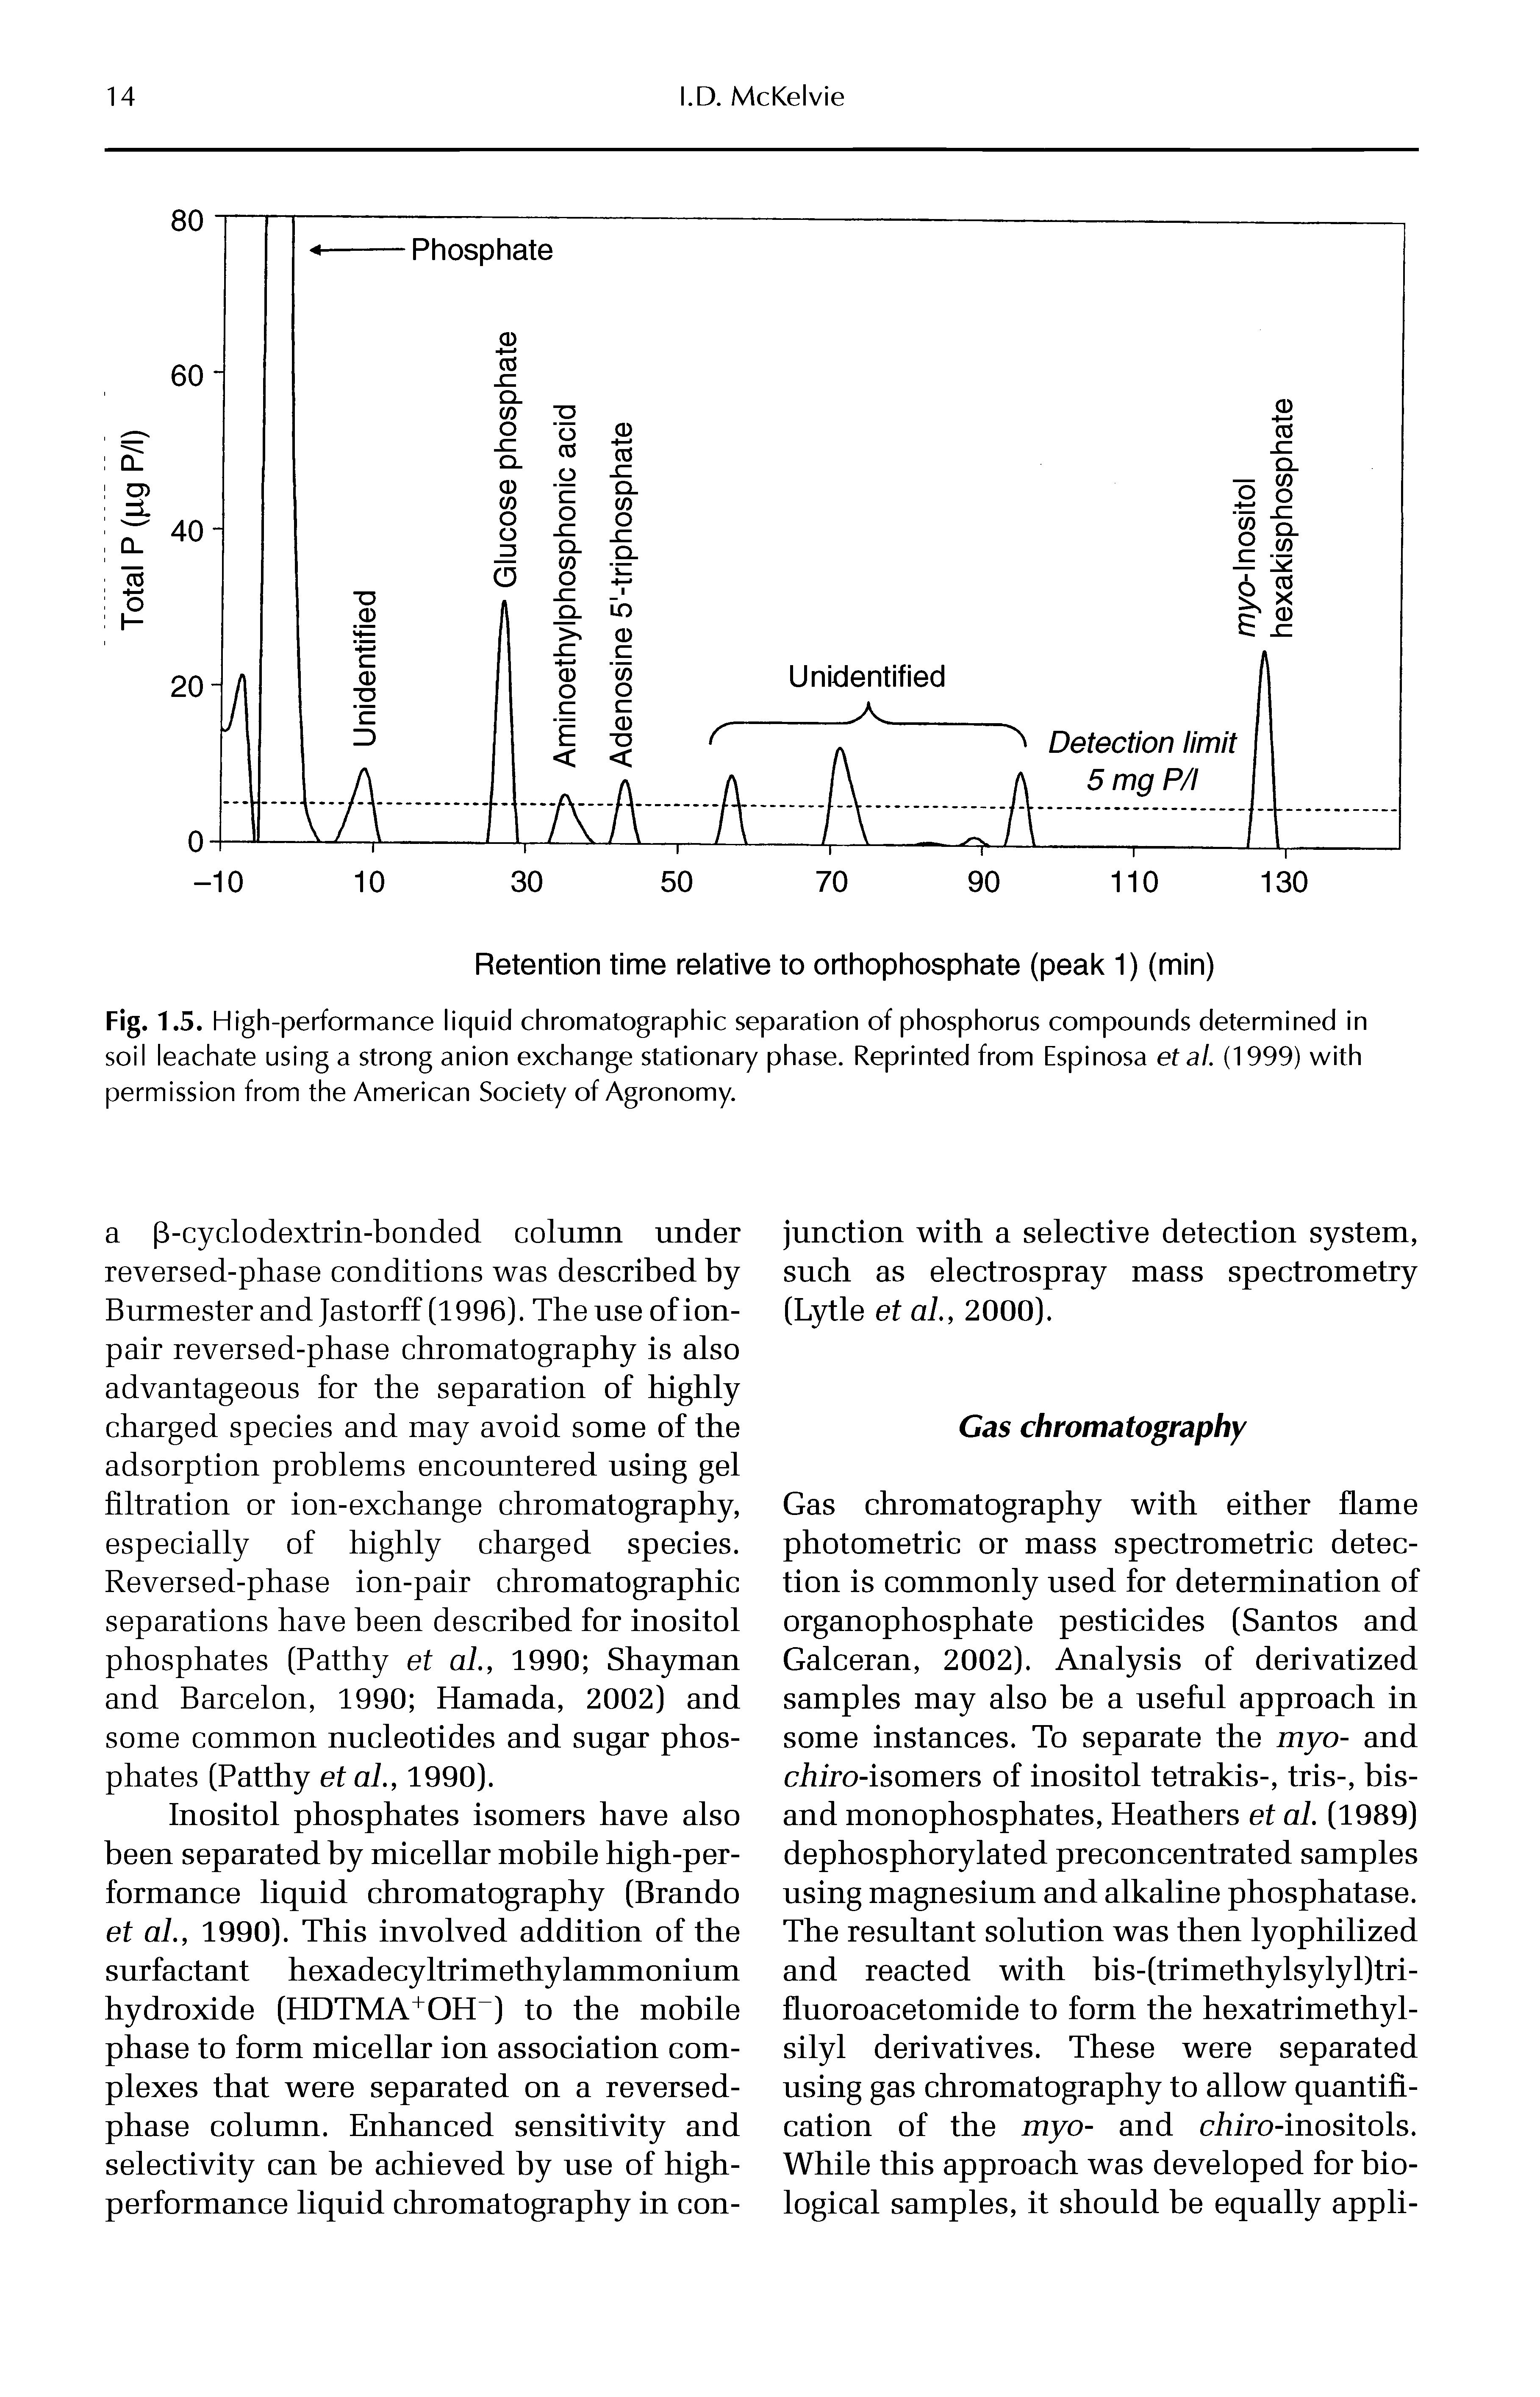 Fig. 1.5. High-performance liquid chromatographic separation of phosphorus compounds determined in soil leachate using a strong anion exchange stationary phase. Reprinted from Espinosa etal. (1999) with permission from the American Society of Agronomy.